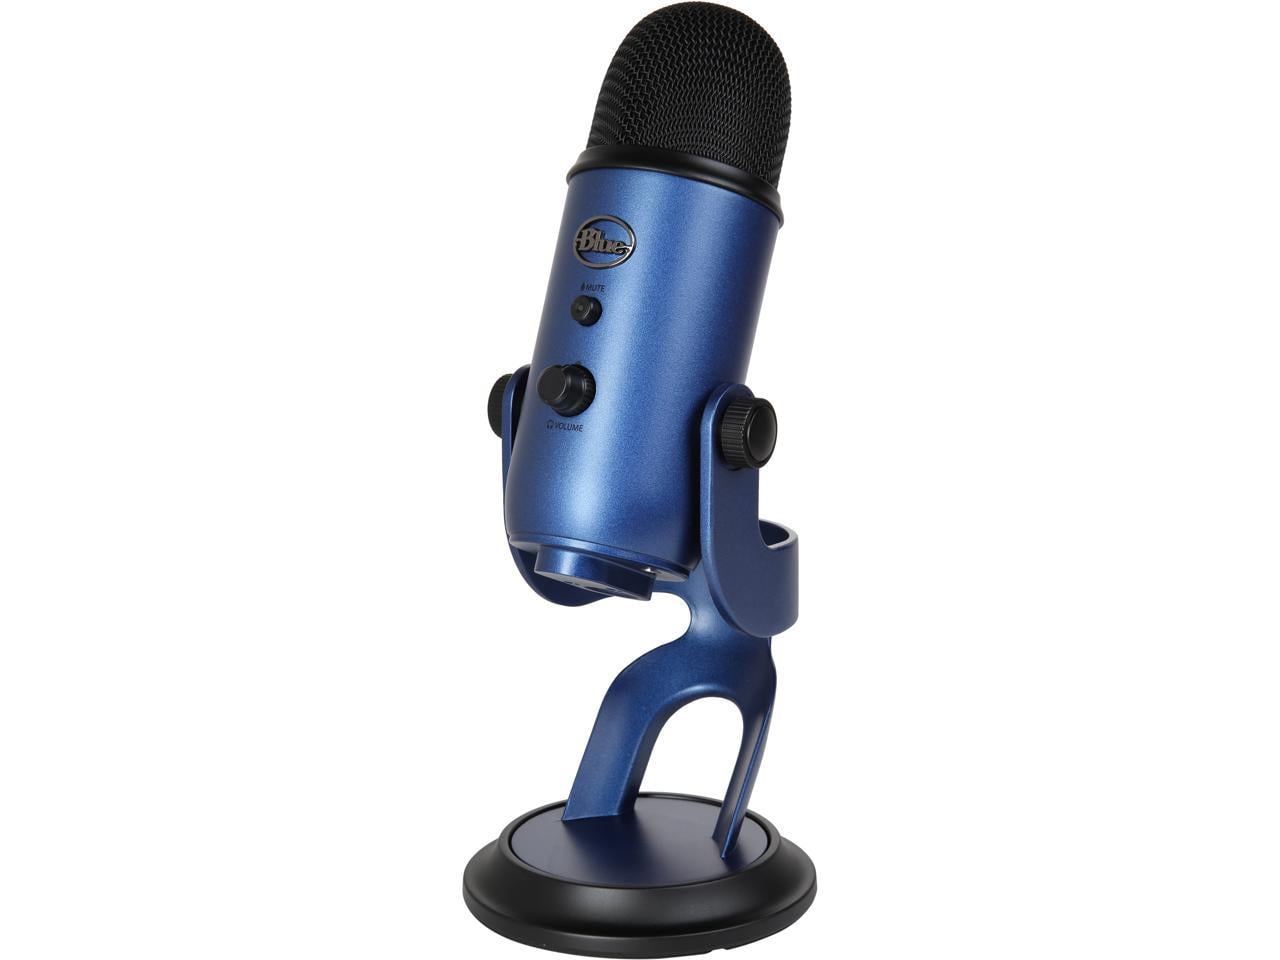 Foran dig indgang Byttehandel Blue Yeti USB Microphone for PC, Mac, Gaming, Recording, Streaming,  Podcasting, Studio and Computer Condenser Mic with Blue VO!CE effects, 4  Pickup Patterns, Plug and Play – Midnight Blue - Walmart.com